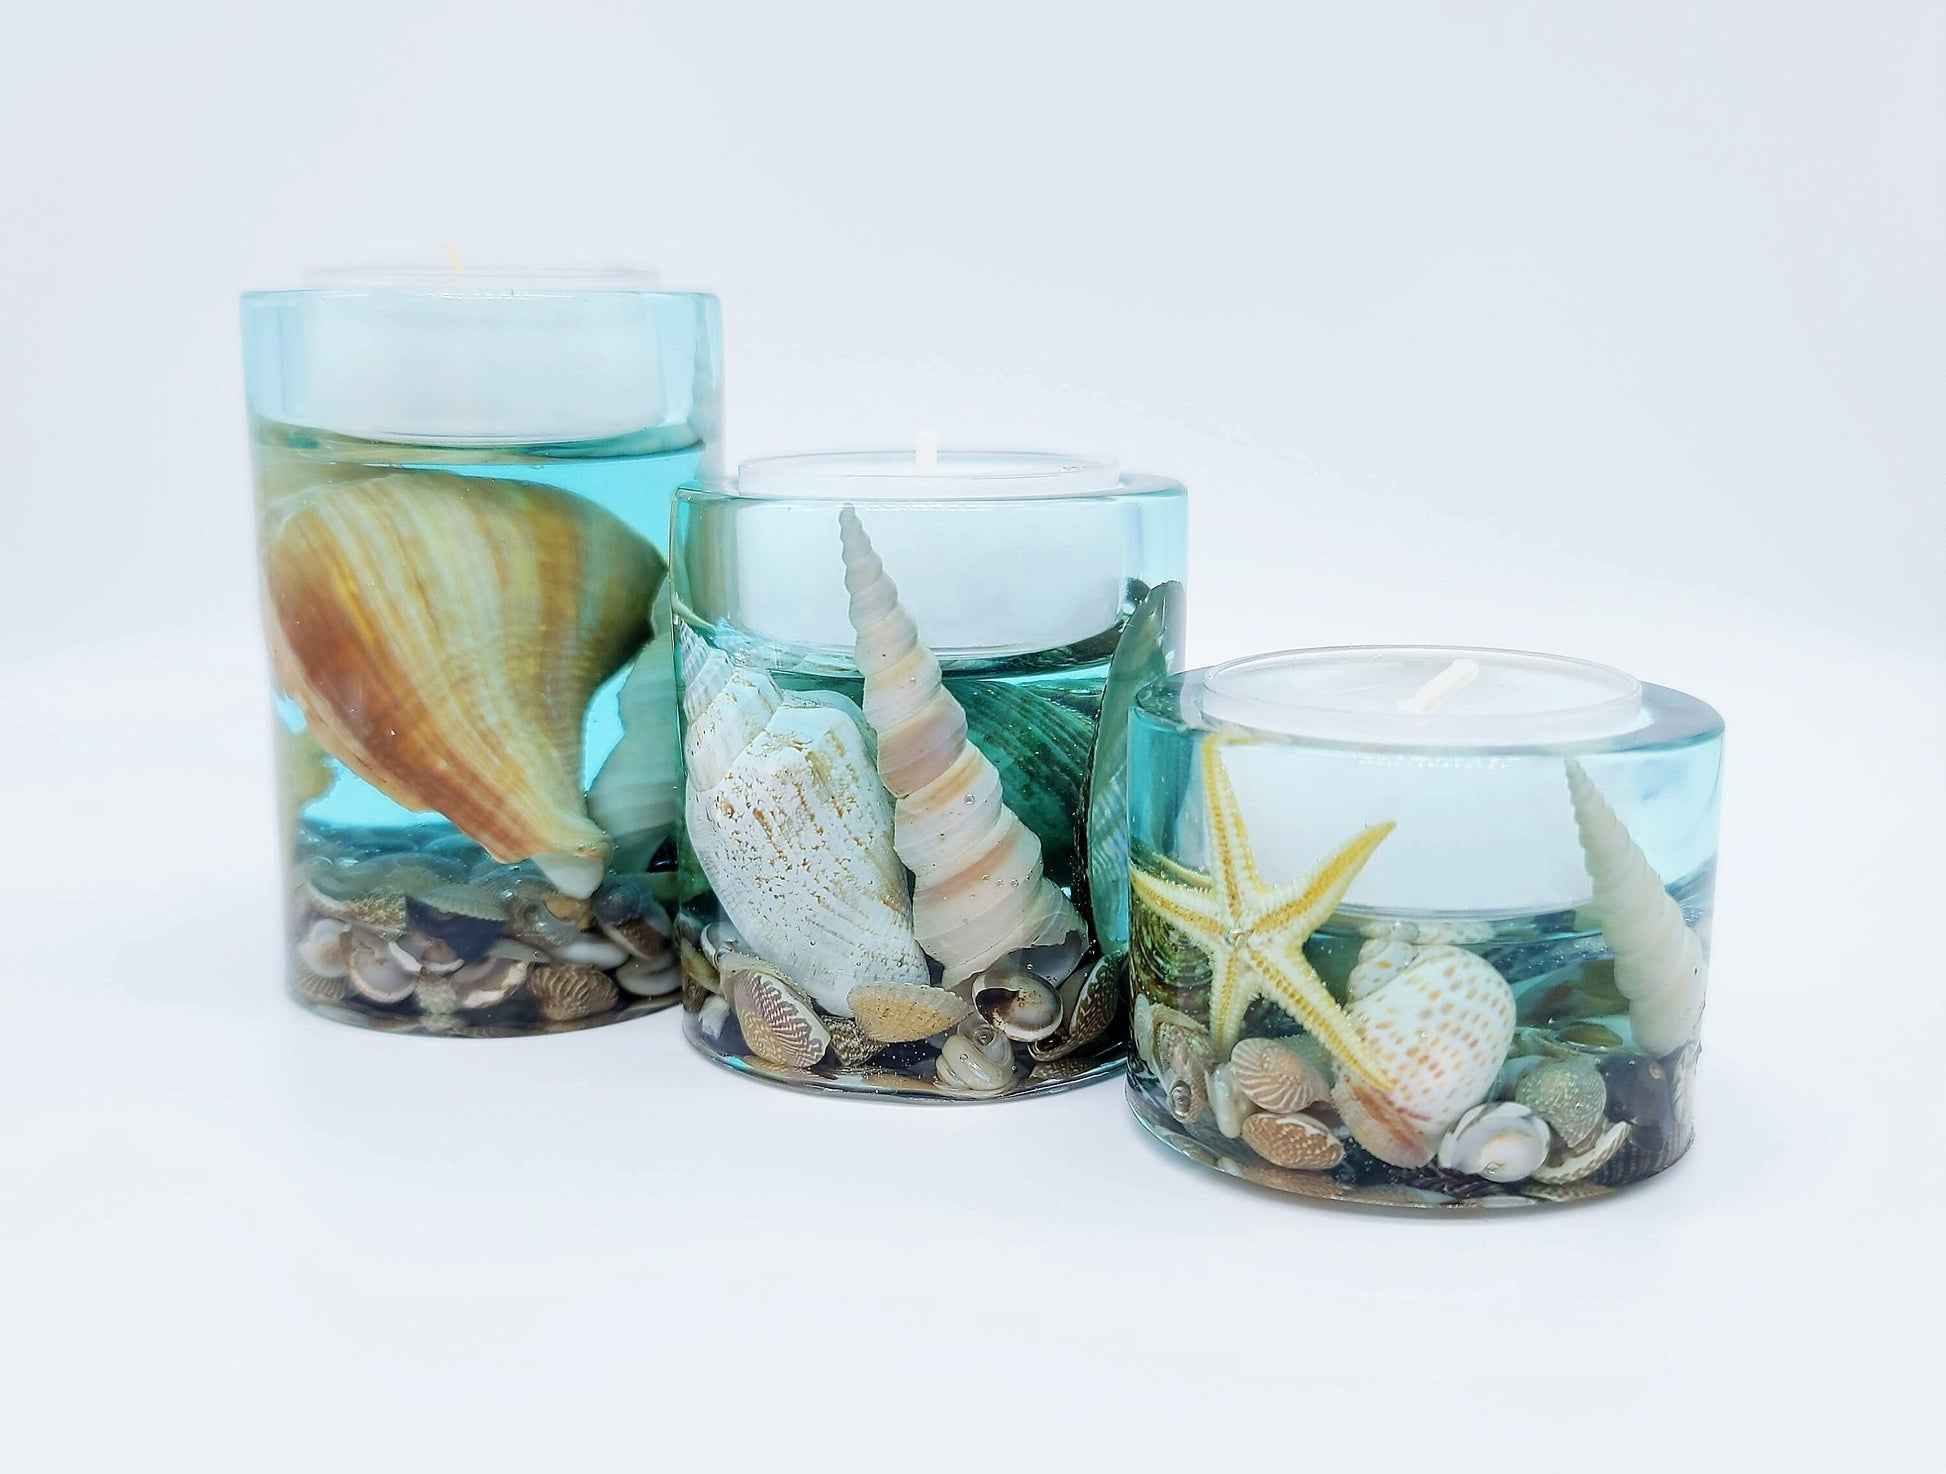 Beach Themed Round Candle Holder Made with Eco-Friendly Epoxy Resin and Seashells - Includes Choice of Real SCENTED Tealight or LED Tealight